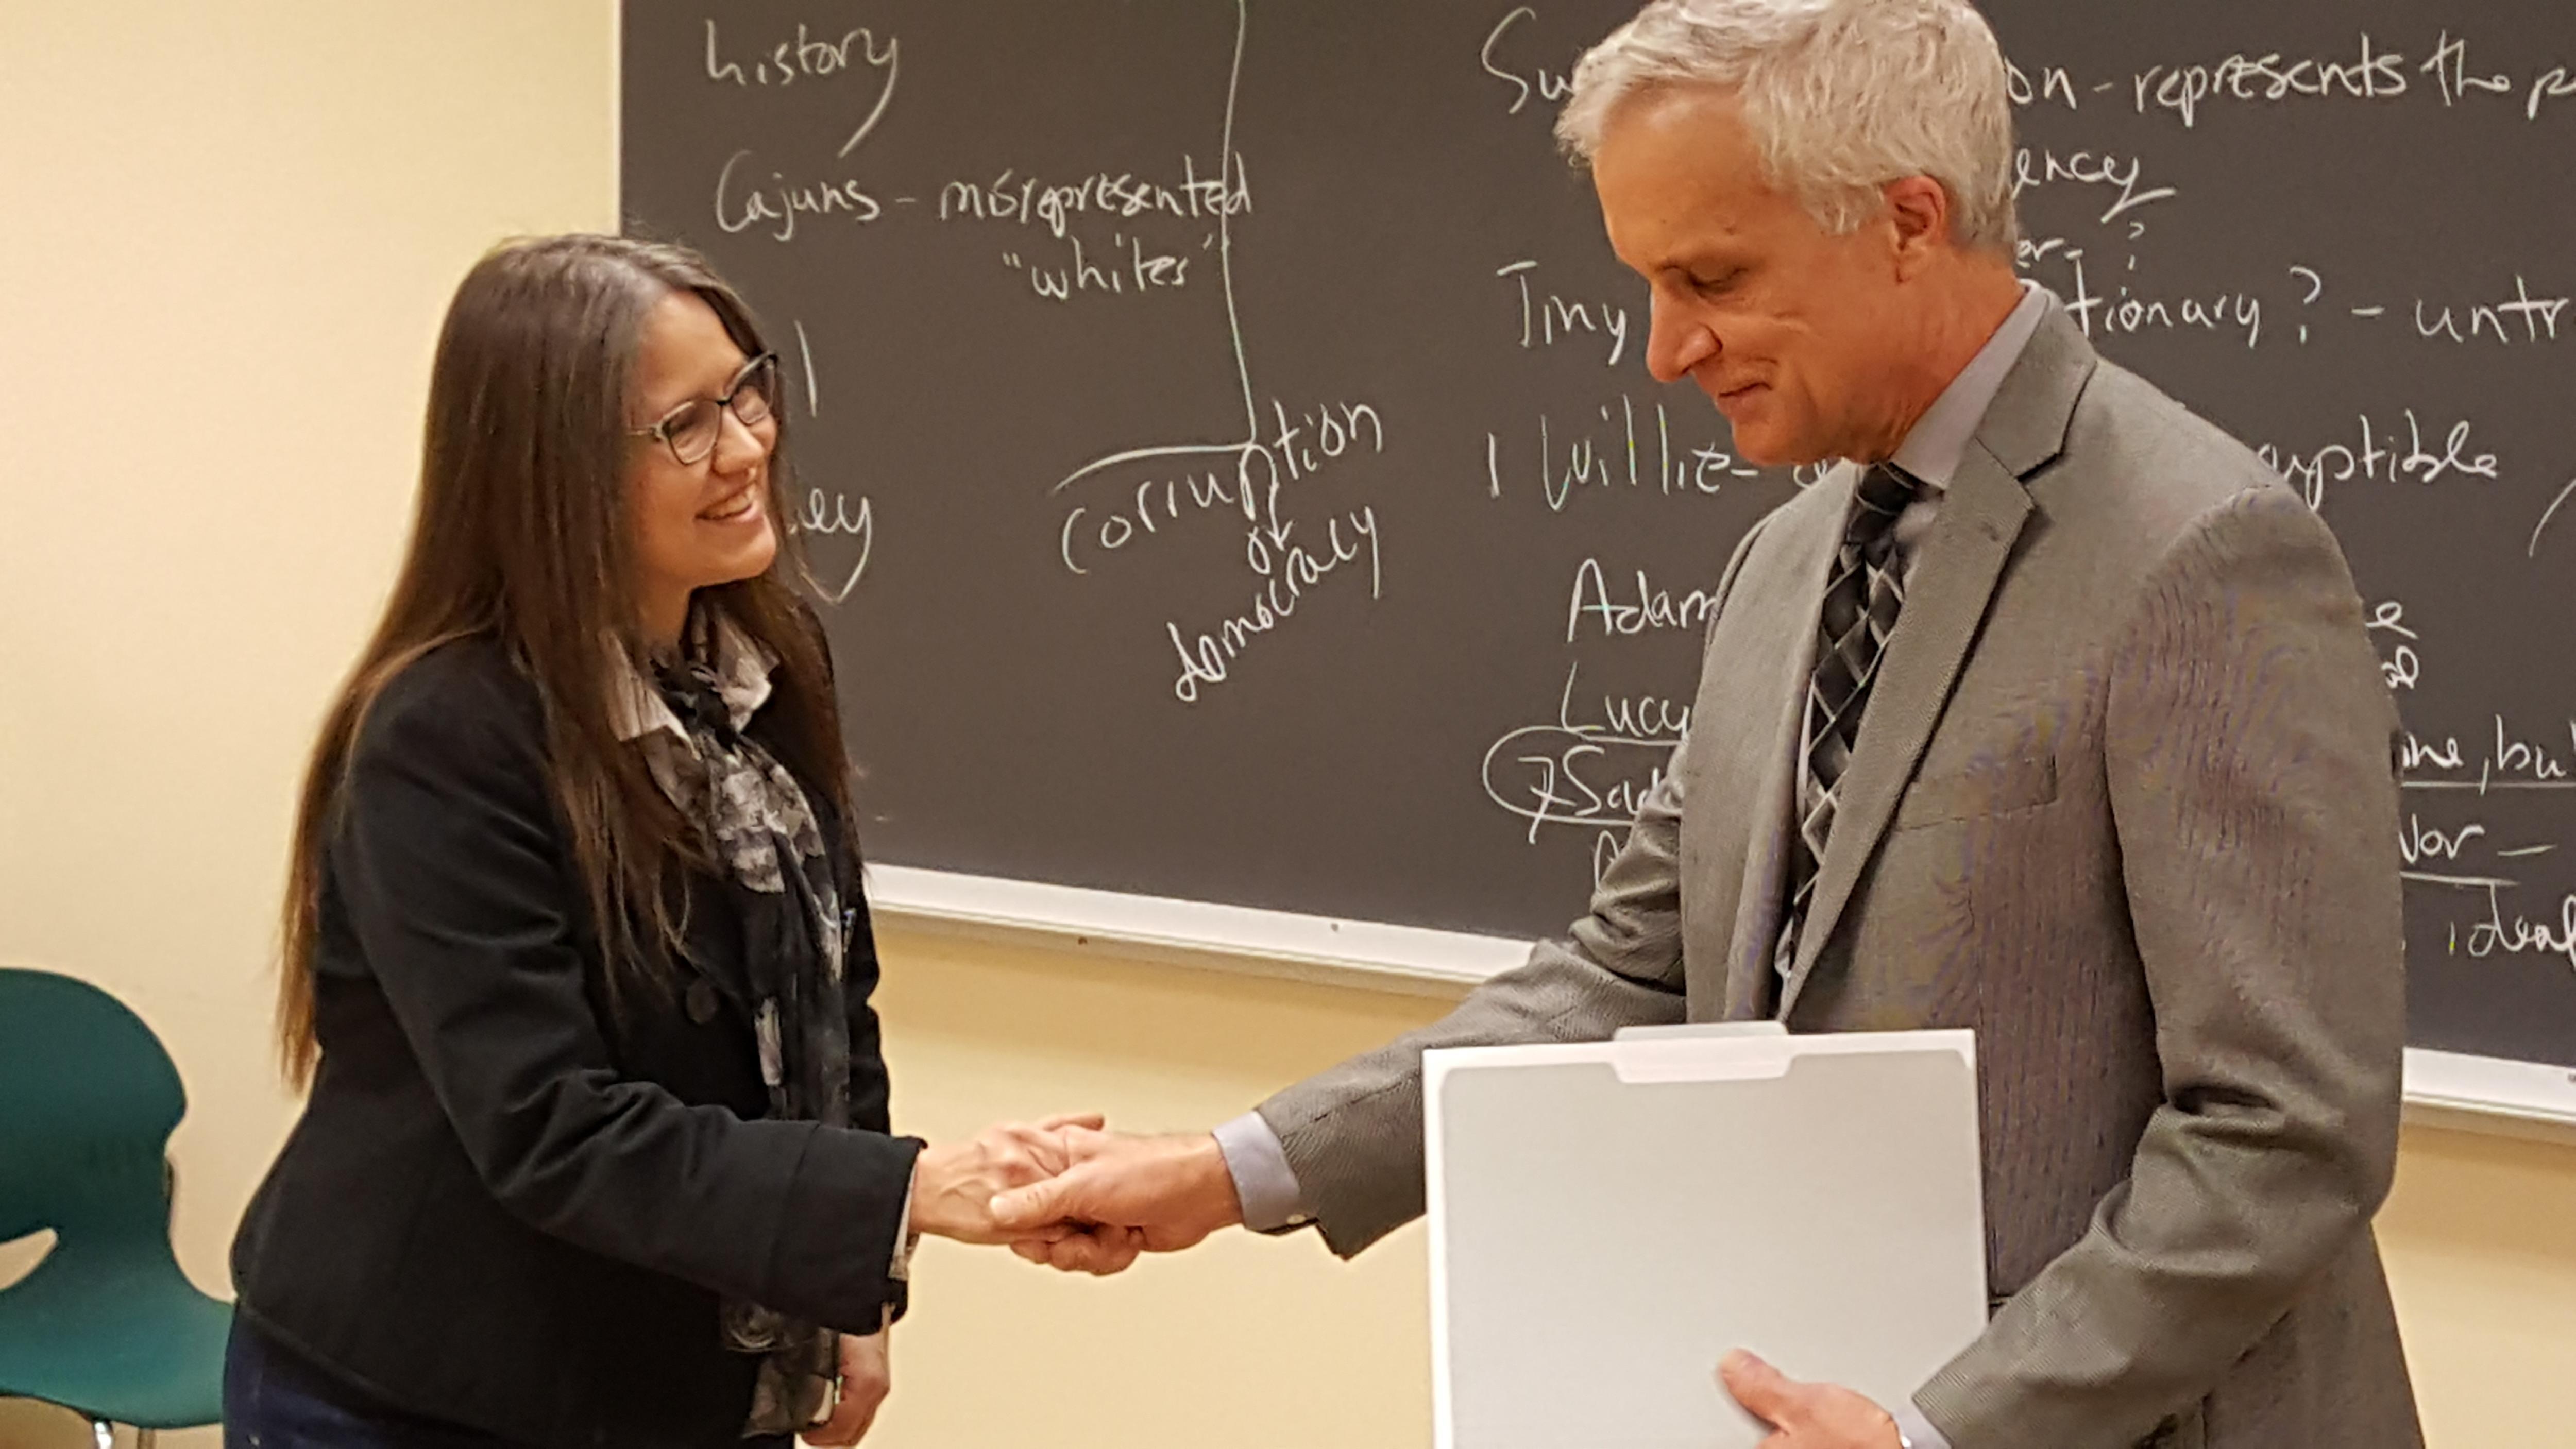 Peter Hahn, Dean of Arts and Humanities presents a $20,000 Ratner Award to Associate Professor of English Sara Crosby, the first regional campus professor to ever receive this prestigious award.